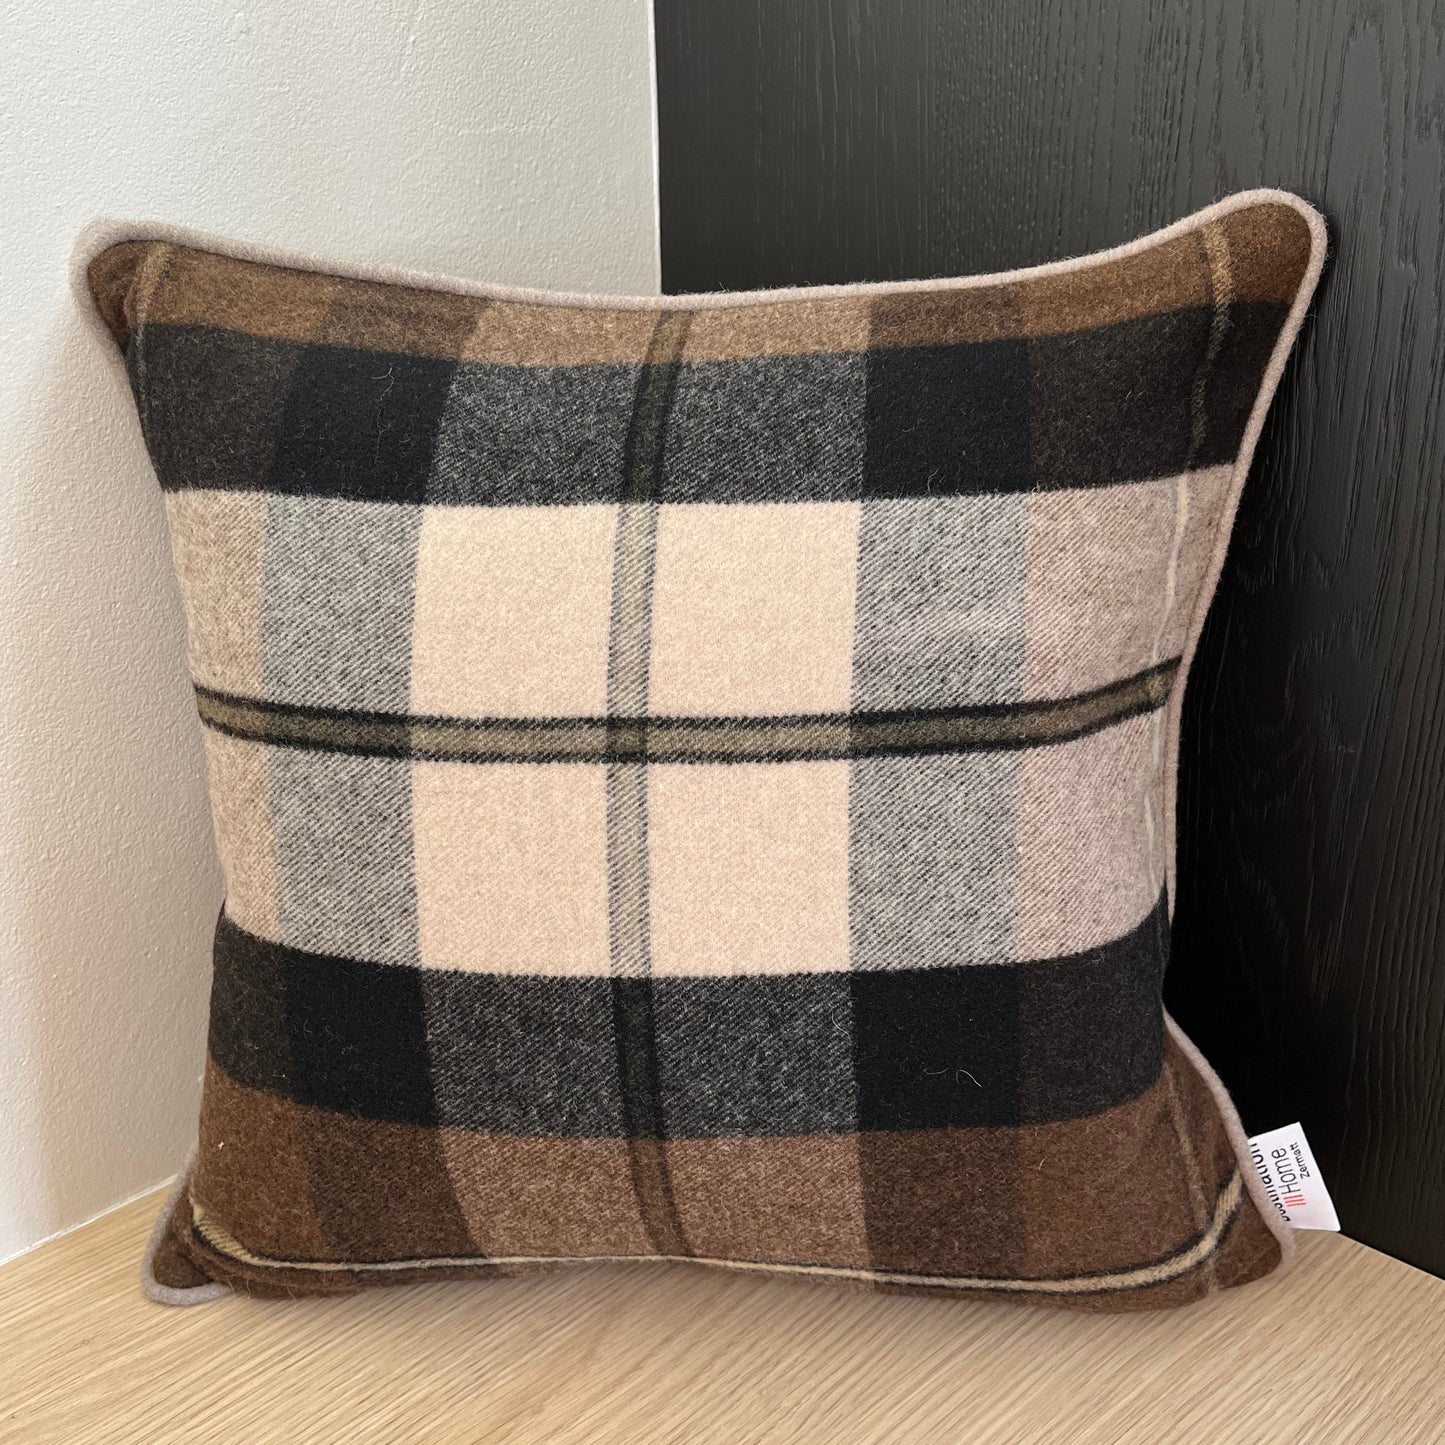 Cushion cover in soft wool fabric